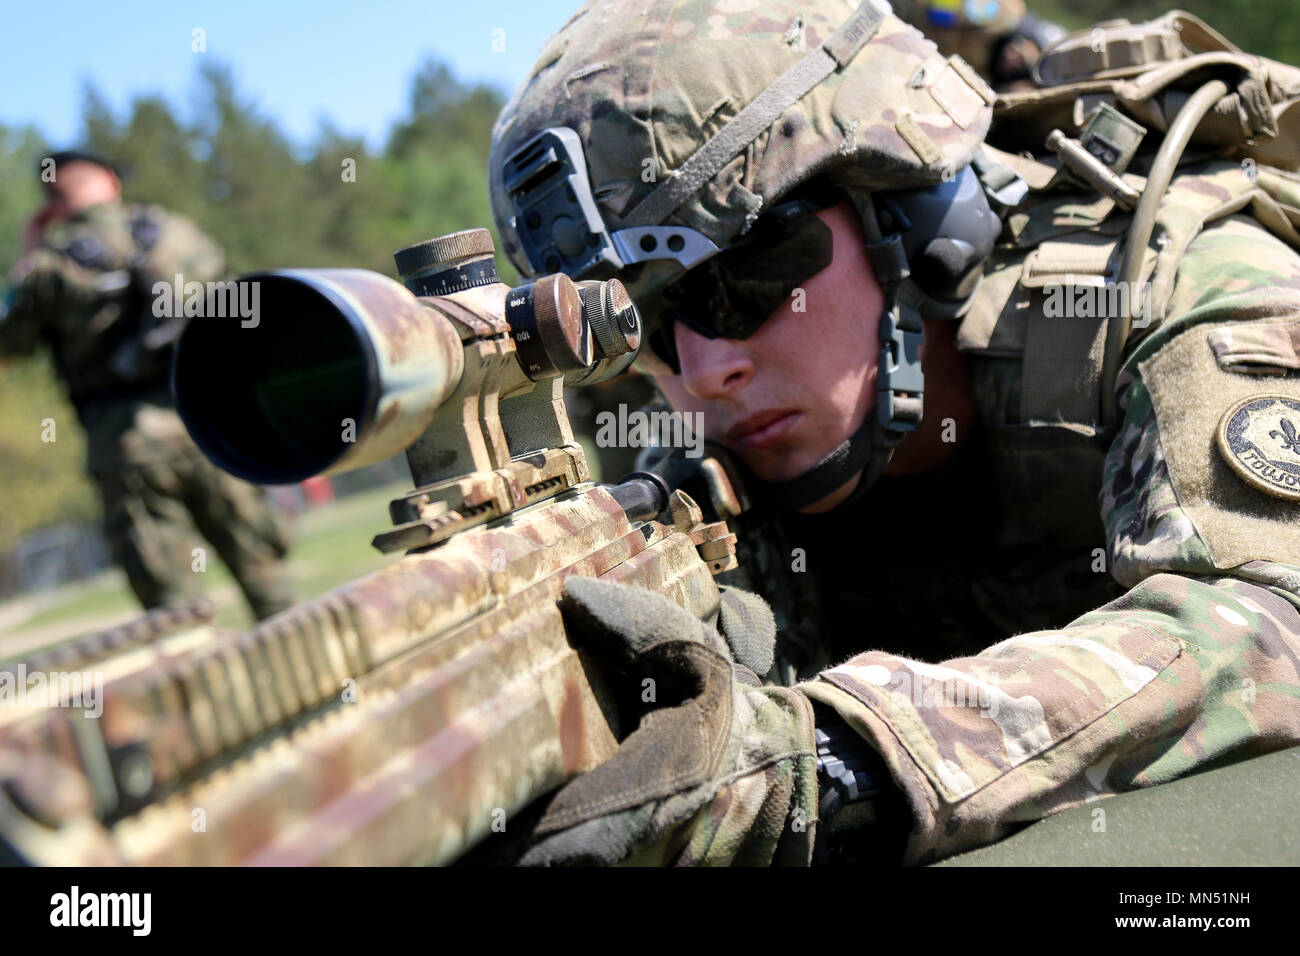 Spc. Daniel Bocon, Seattle native, infantryman assigned to 1st Squadron,  2nd Cavalry Regiment, fires the Polish army Sako TRG sniper rifle during a  multinational weapons range with Battle Group Poland at Bemowo